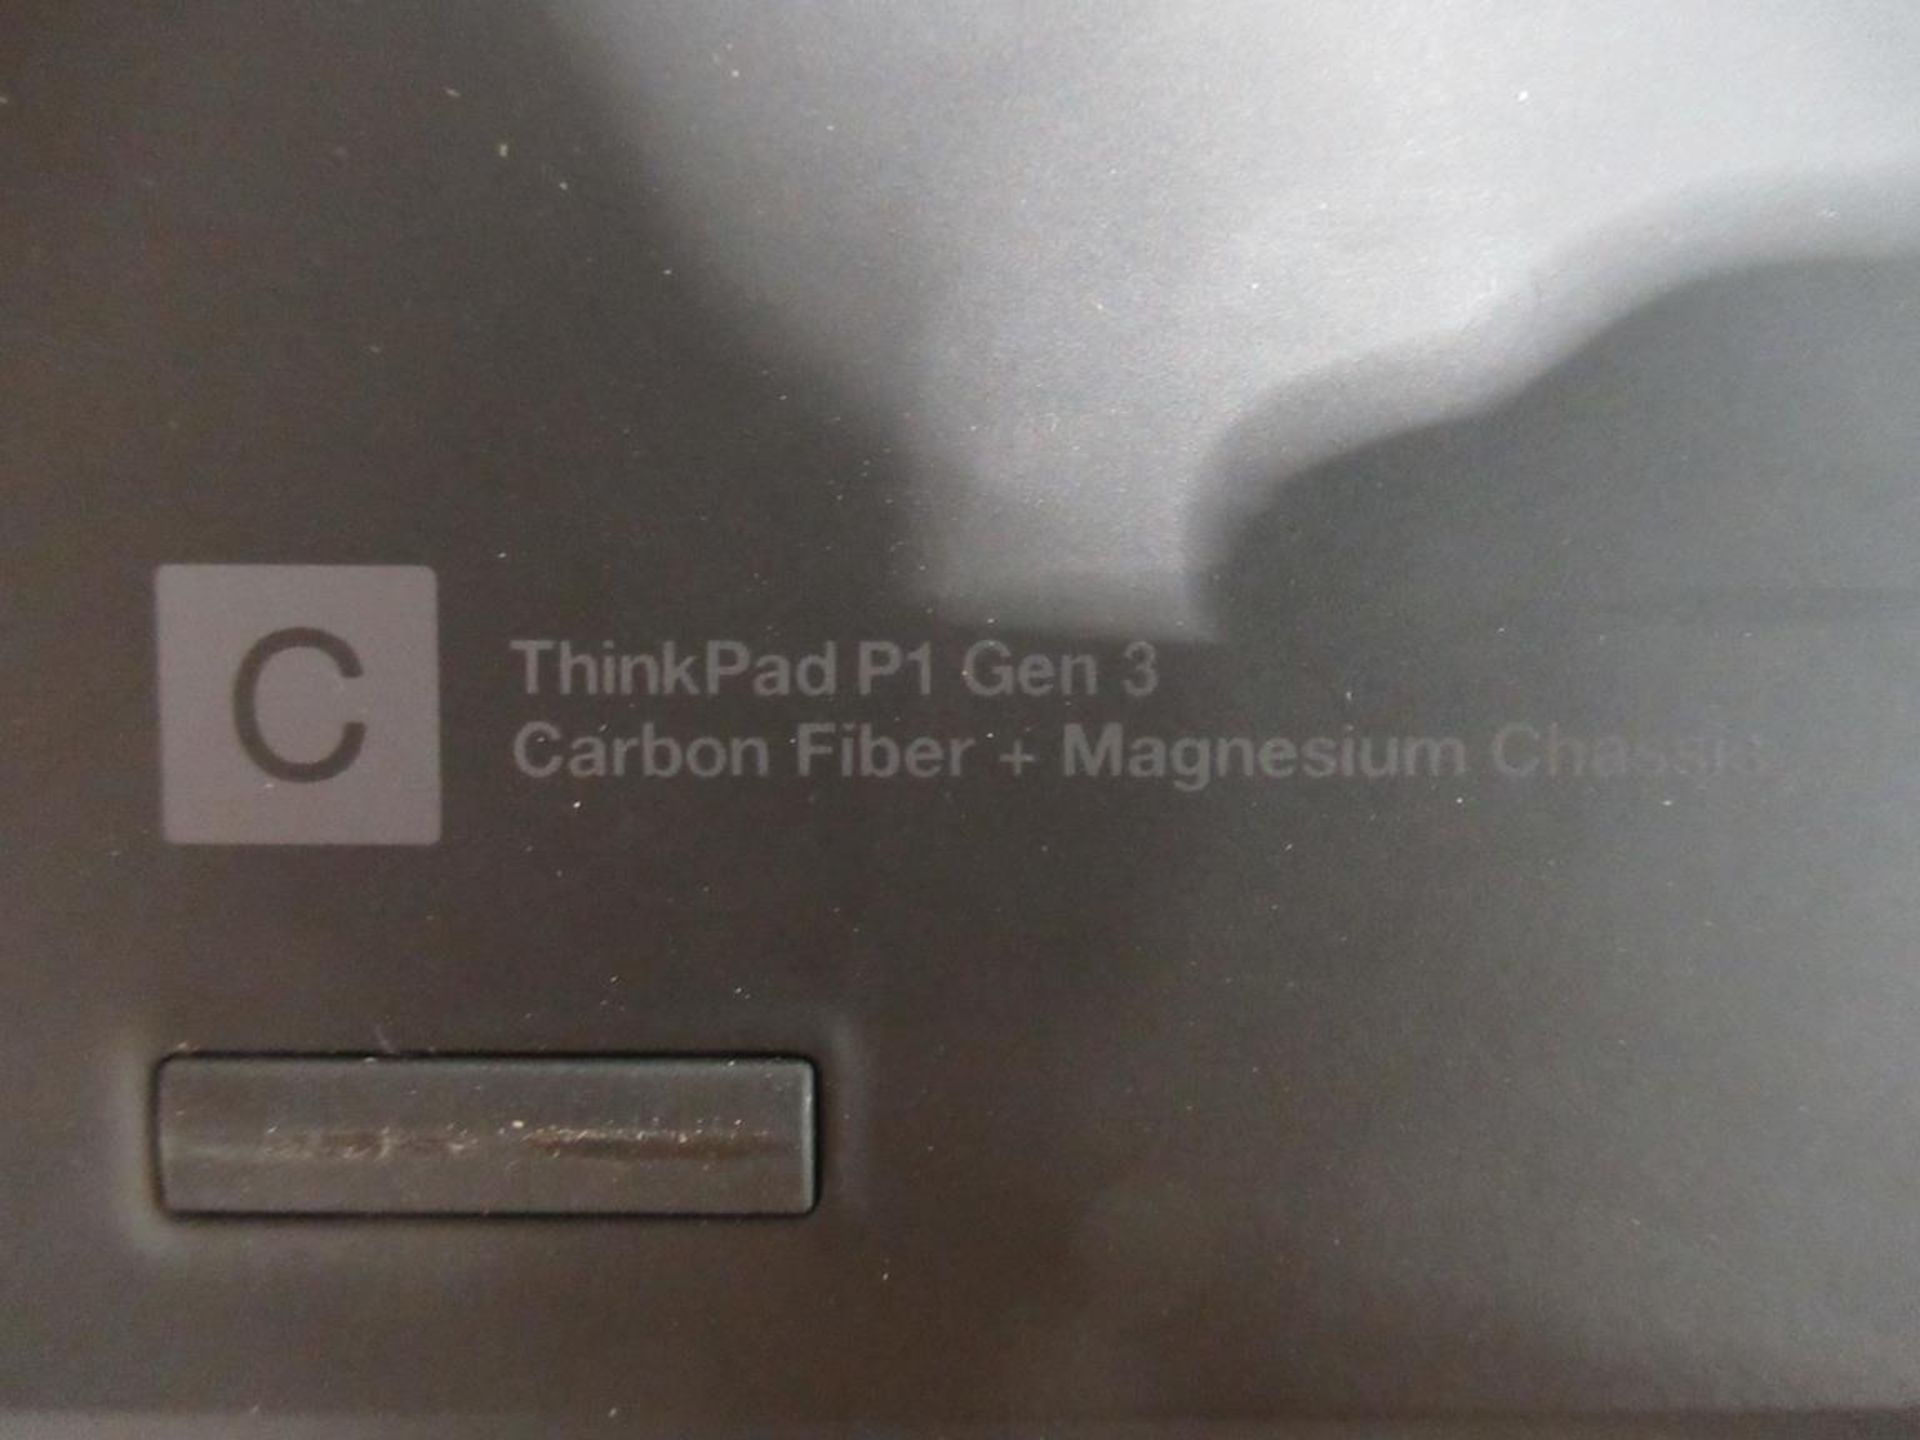 Lenovo, Thinkpad P1 Gen 3 CAD specification (boxed) - Image 4 of 6